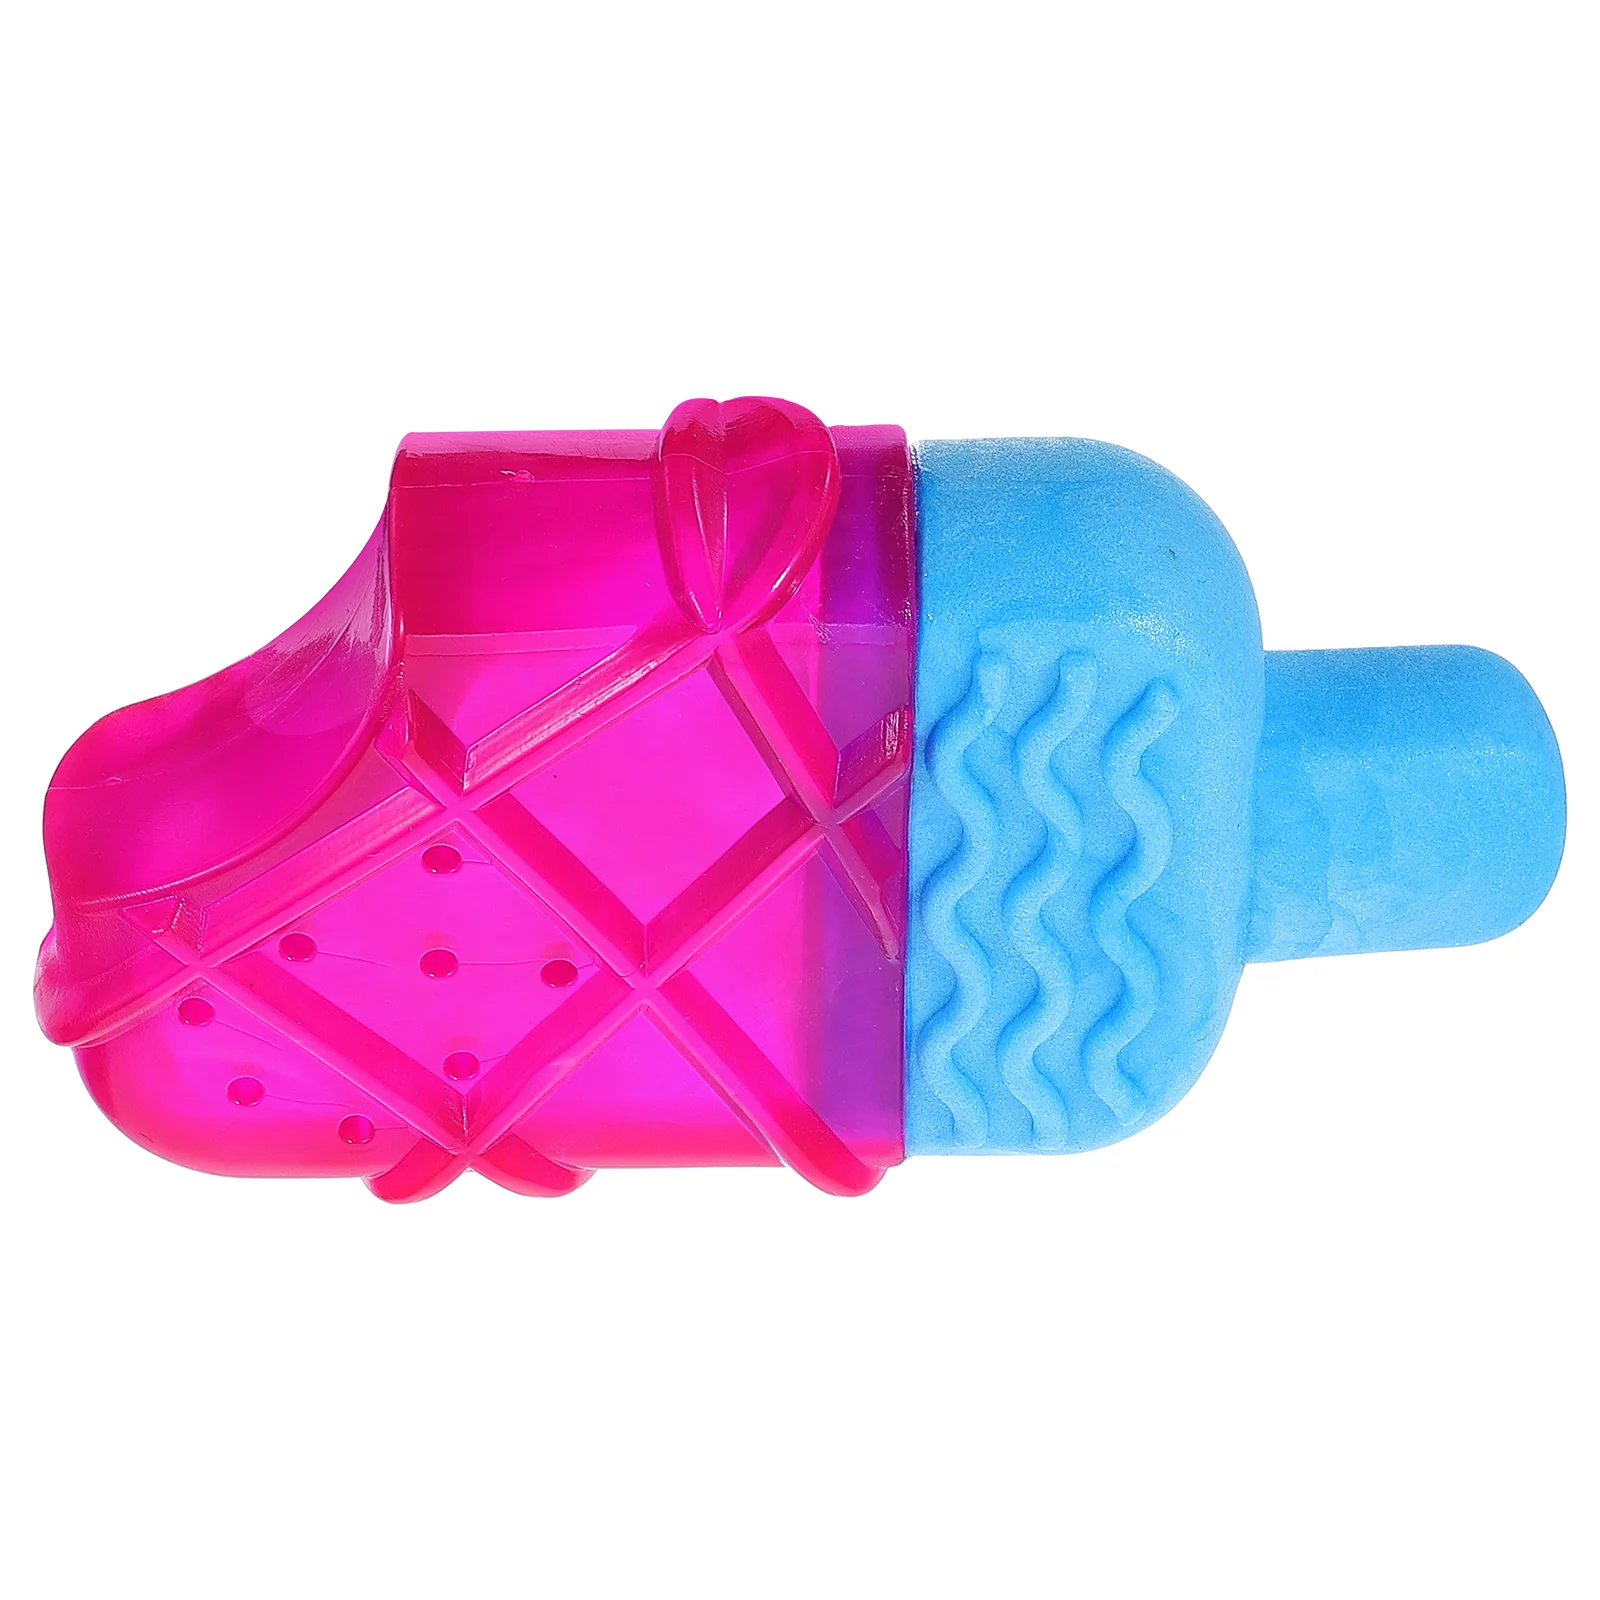 

Dog Toy Freezable Puppy Teething Chew Toys for Freeze Summer Treat Pet Cooling Ice Lollipop Training Chewing Treats